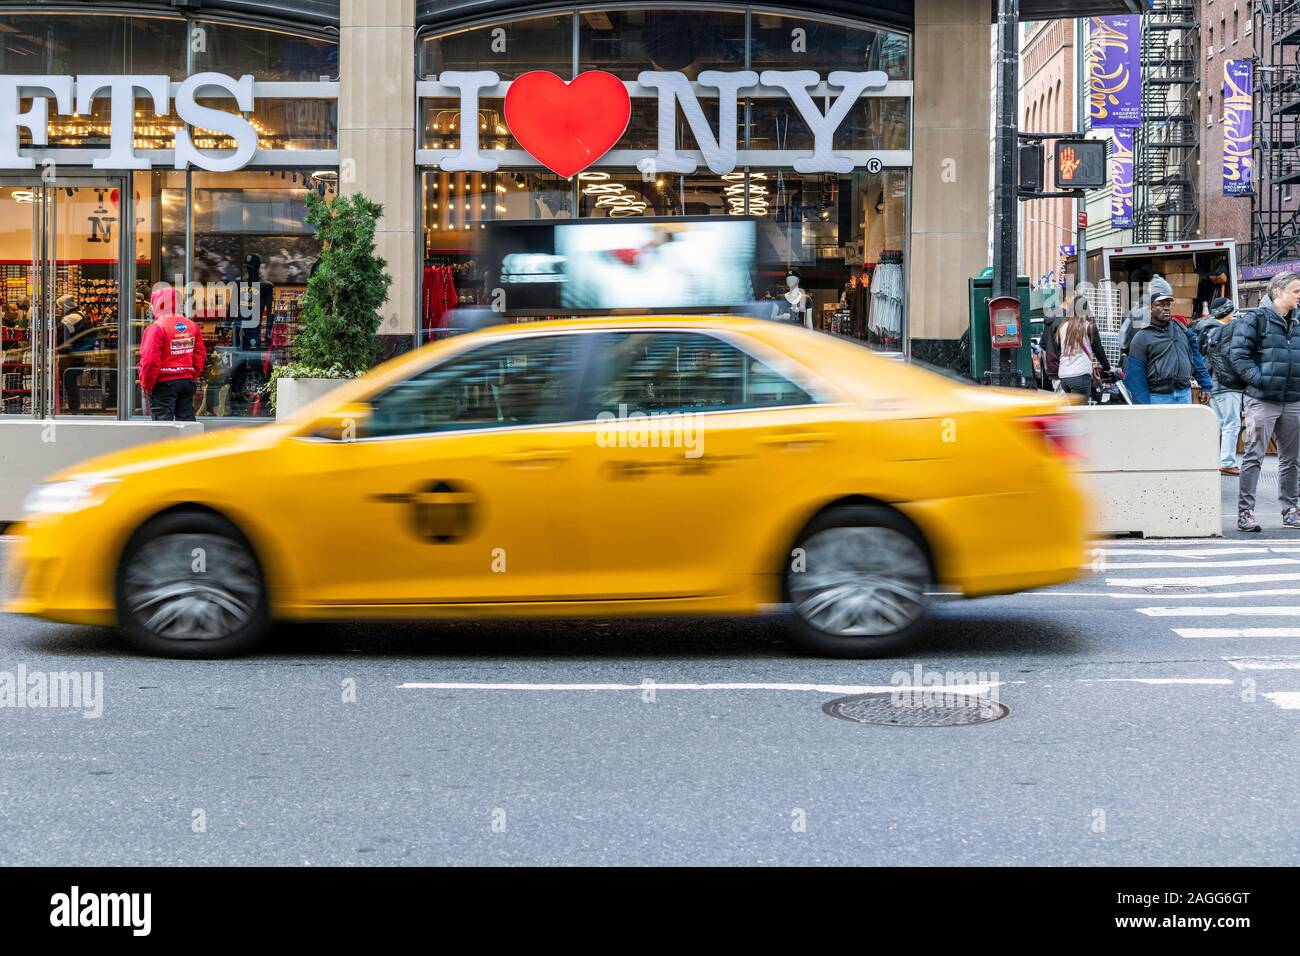 I Love New York gift shop sign and blurred yellow taxi cab passing, Times Square, Manhattan, New York, USA Stock Photo